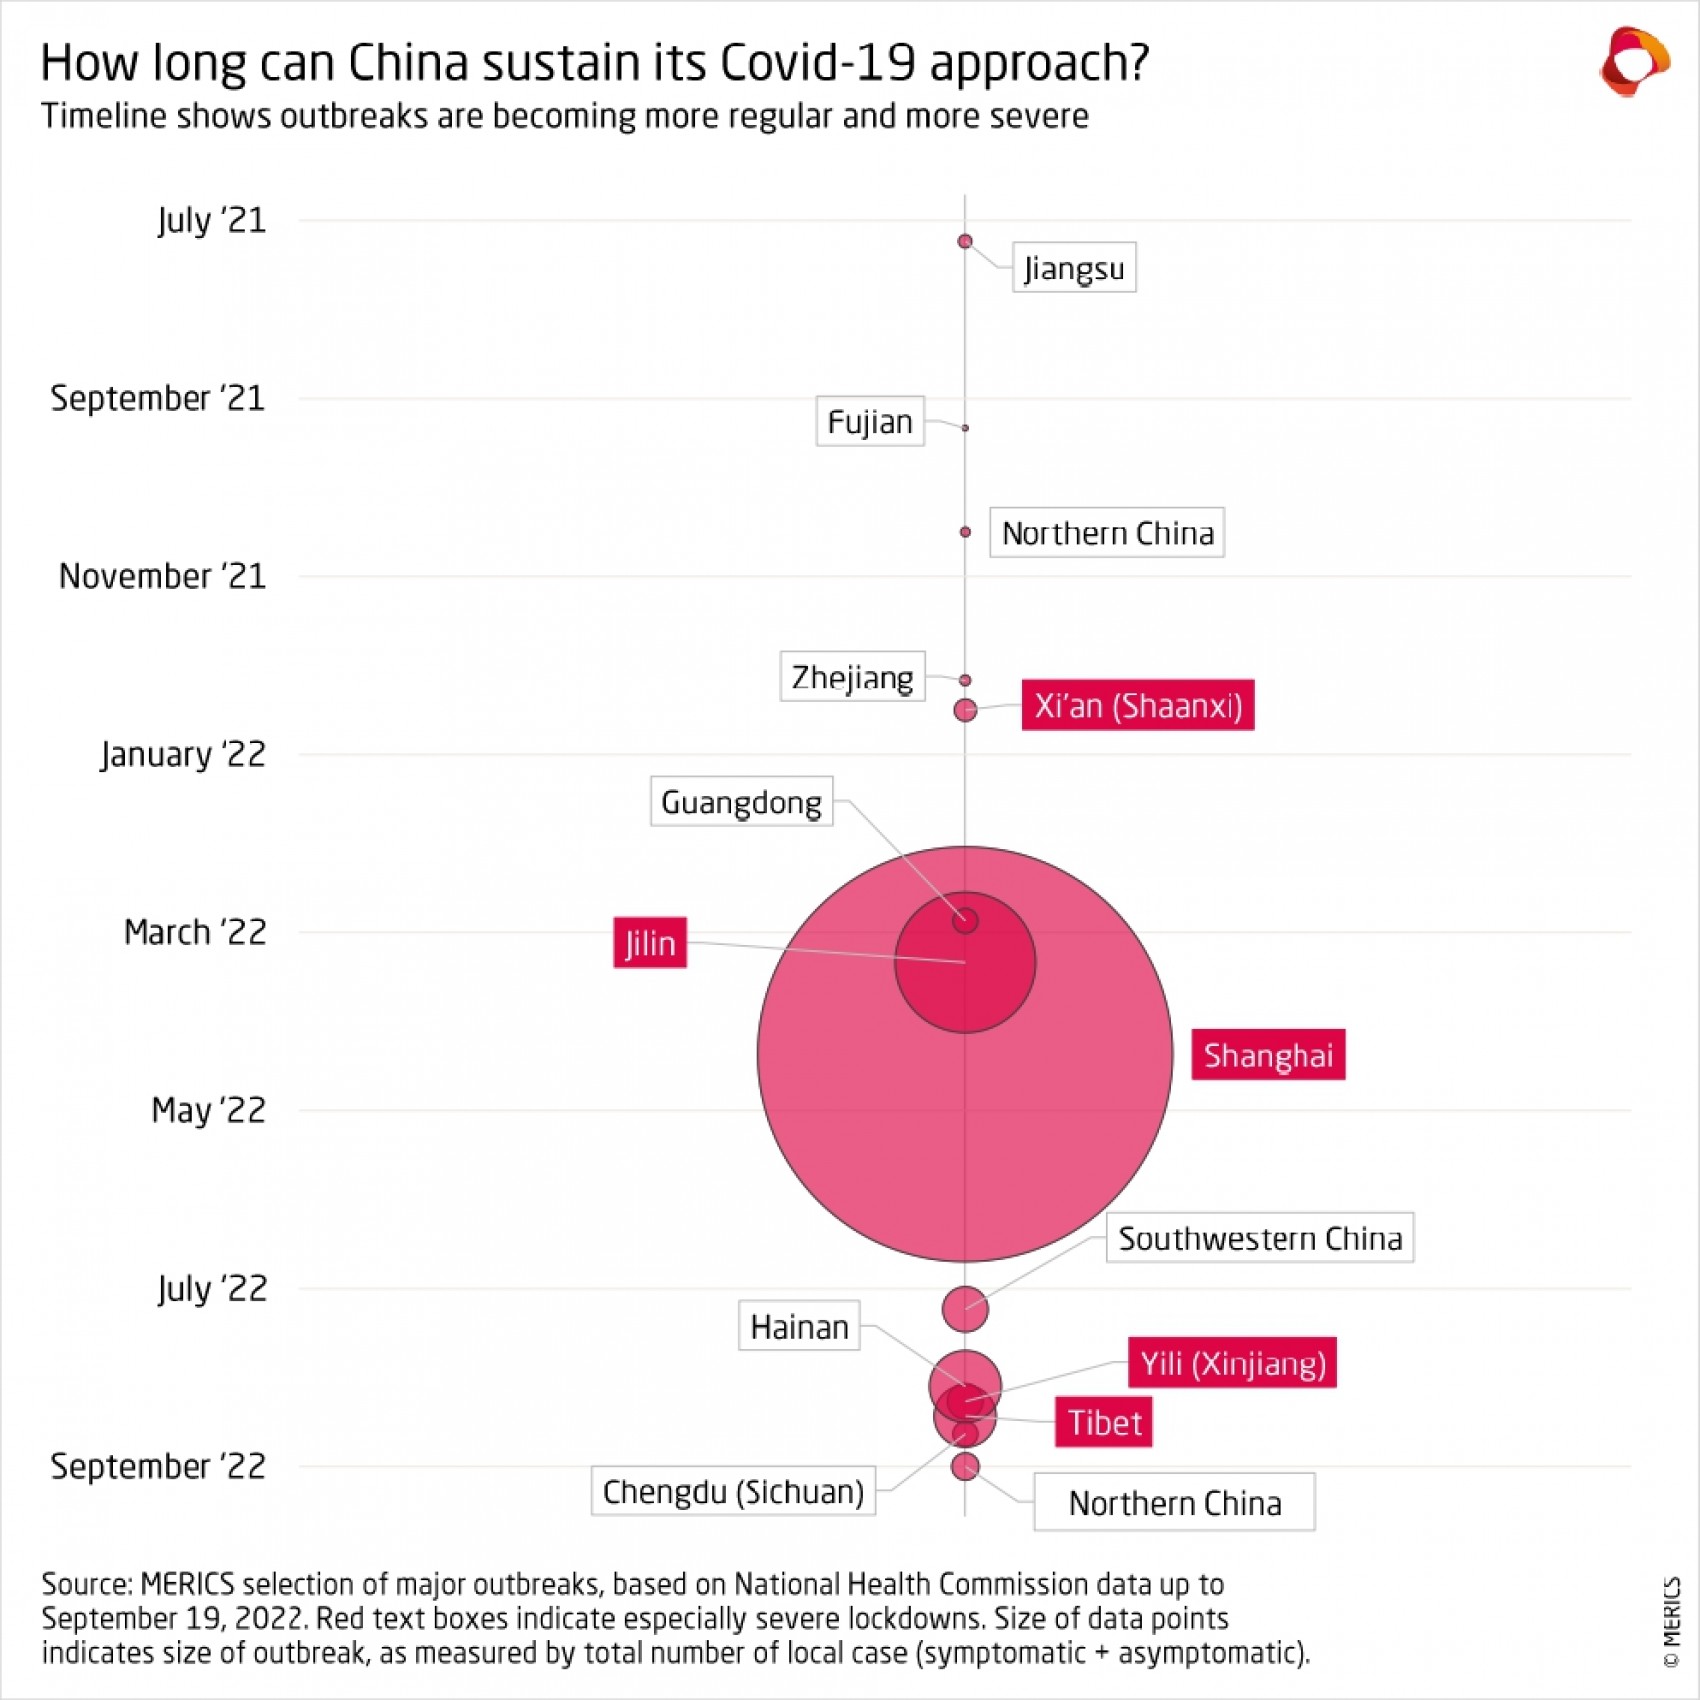 How long can China sustain its Covid-19 approach?